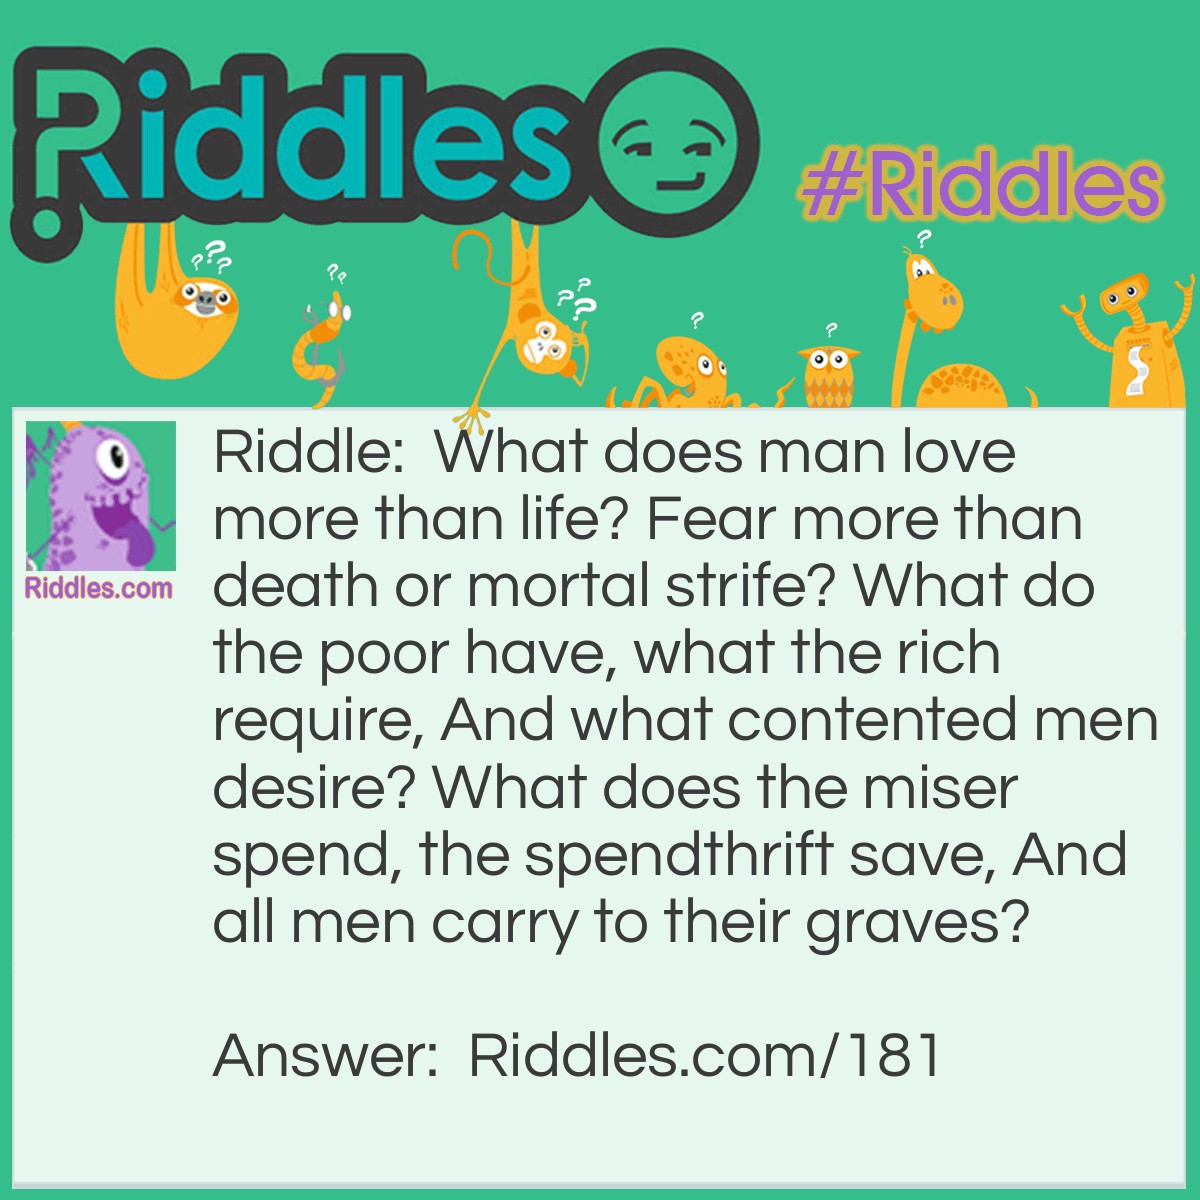 Riddle: What does man love more than life? Fear more than death or mortal strife? What do the poor have, what the rich require, And what contented men desire? What does the miser spend, the spendthrift save, And all men carry to their graves? Answer: Nothing.